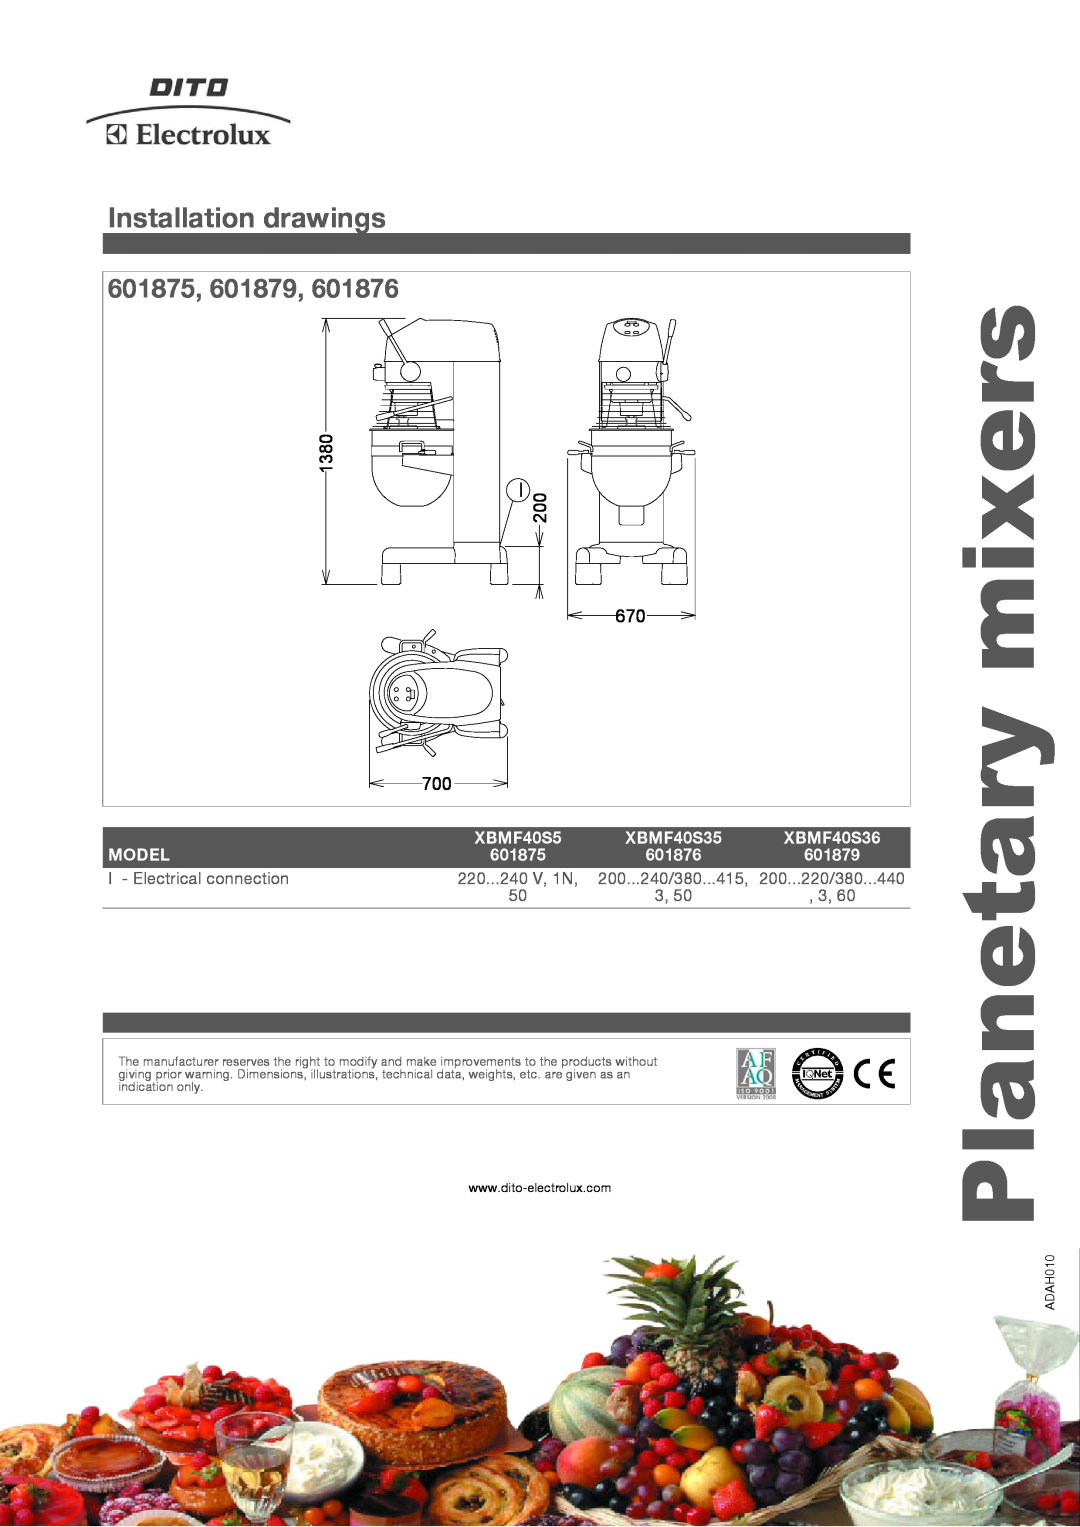 Electrolux XBMF40S36 Installation drawings, 601875, 601879, Planetary mixers, 1380, XBMF40S5, XBMF40S35, Model, 601876 